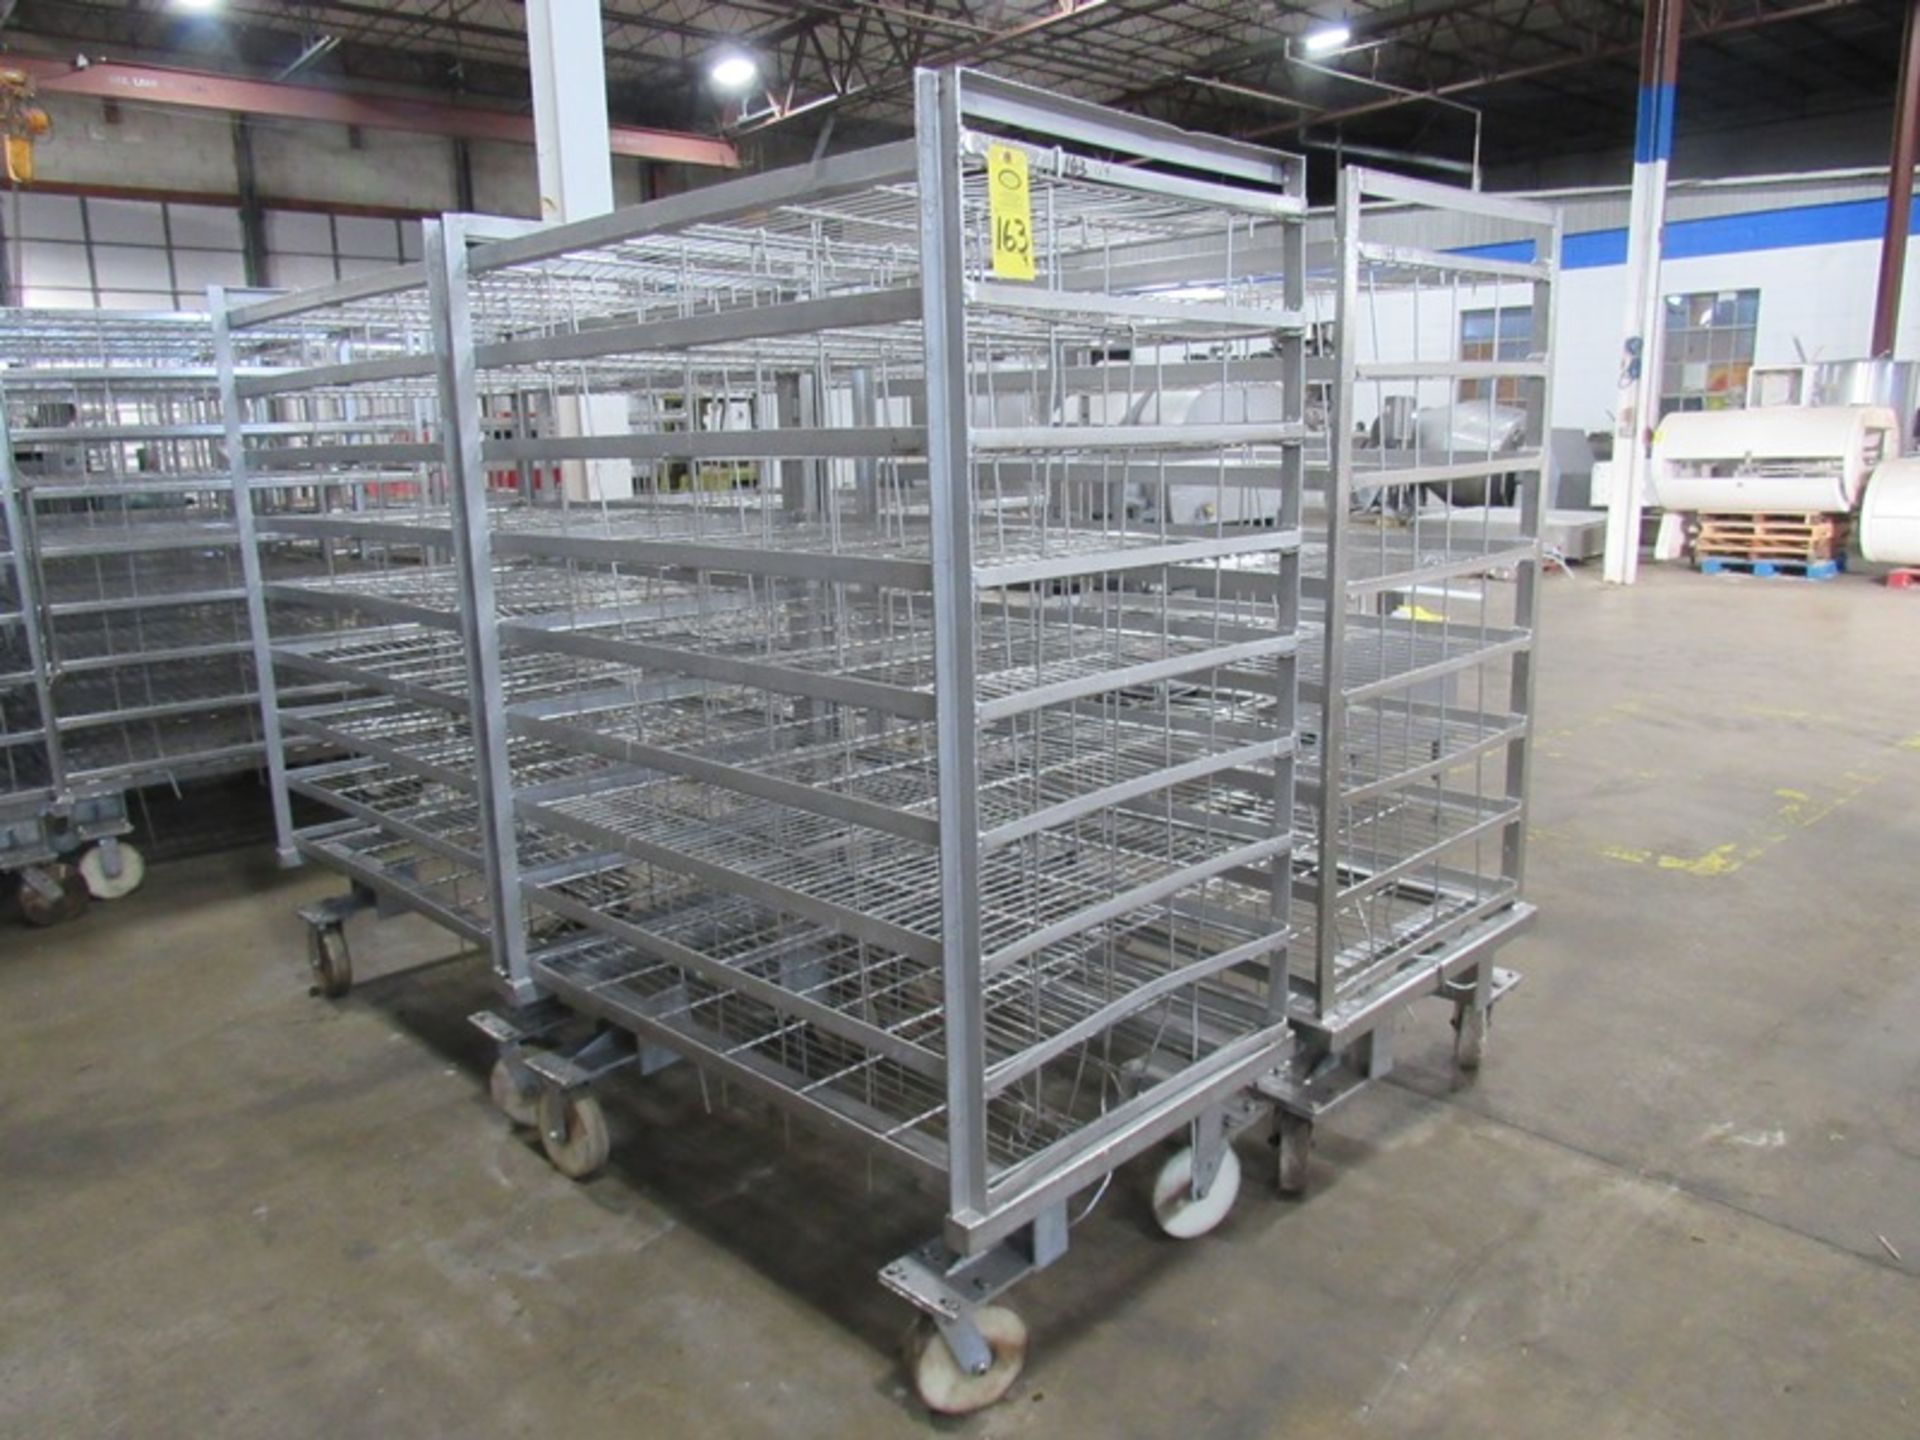 Stainless Steel Smoke Trucks, 42" W X 52" L X 62" T, 8 spaces, 5" apart (Required Loading Fee $40-